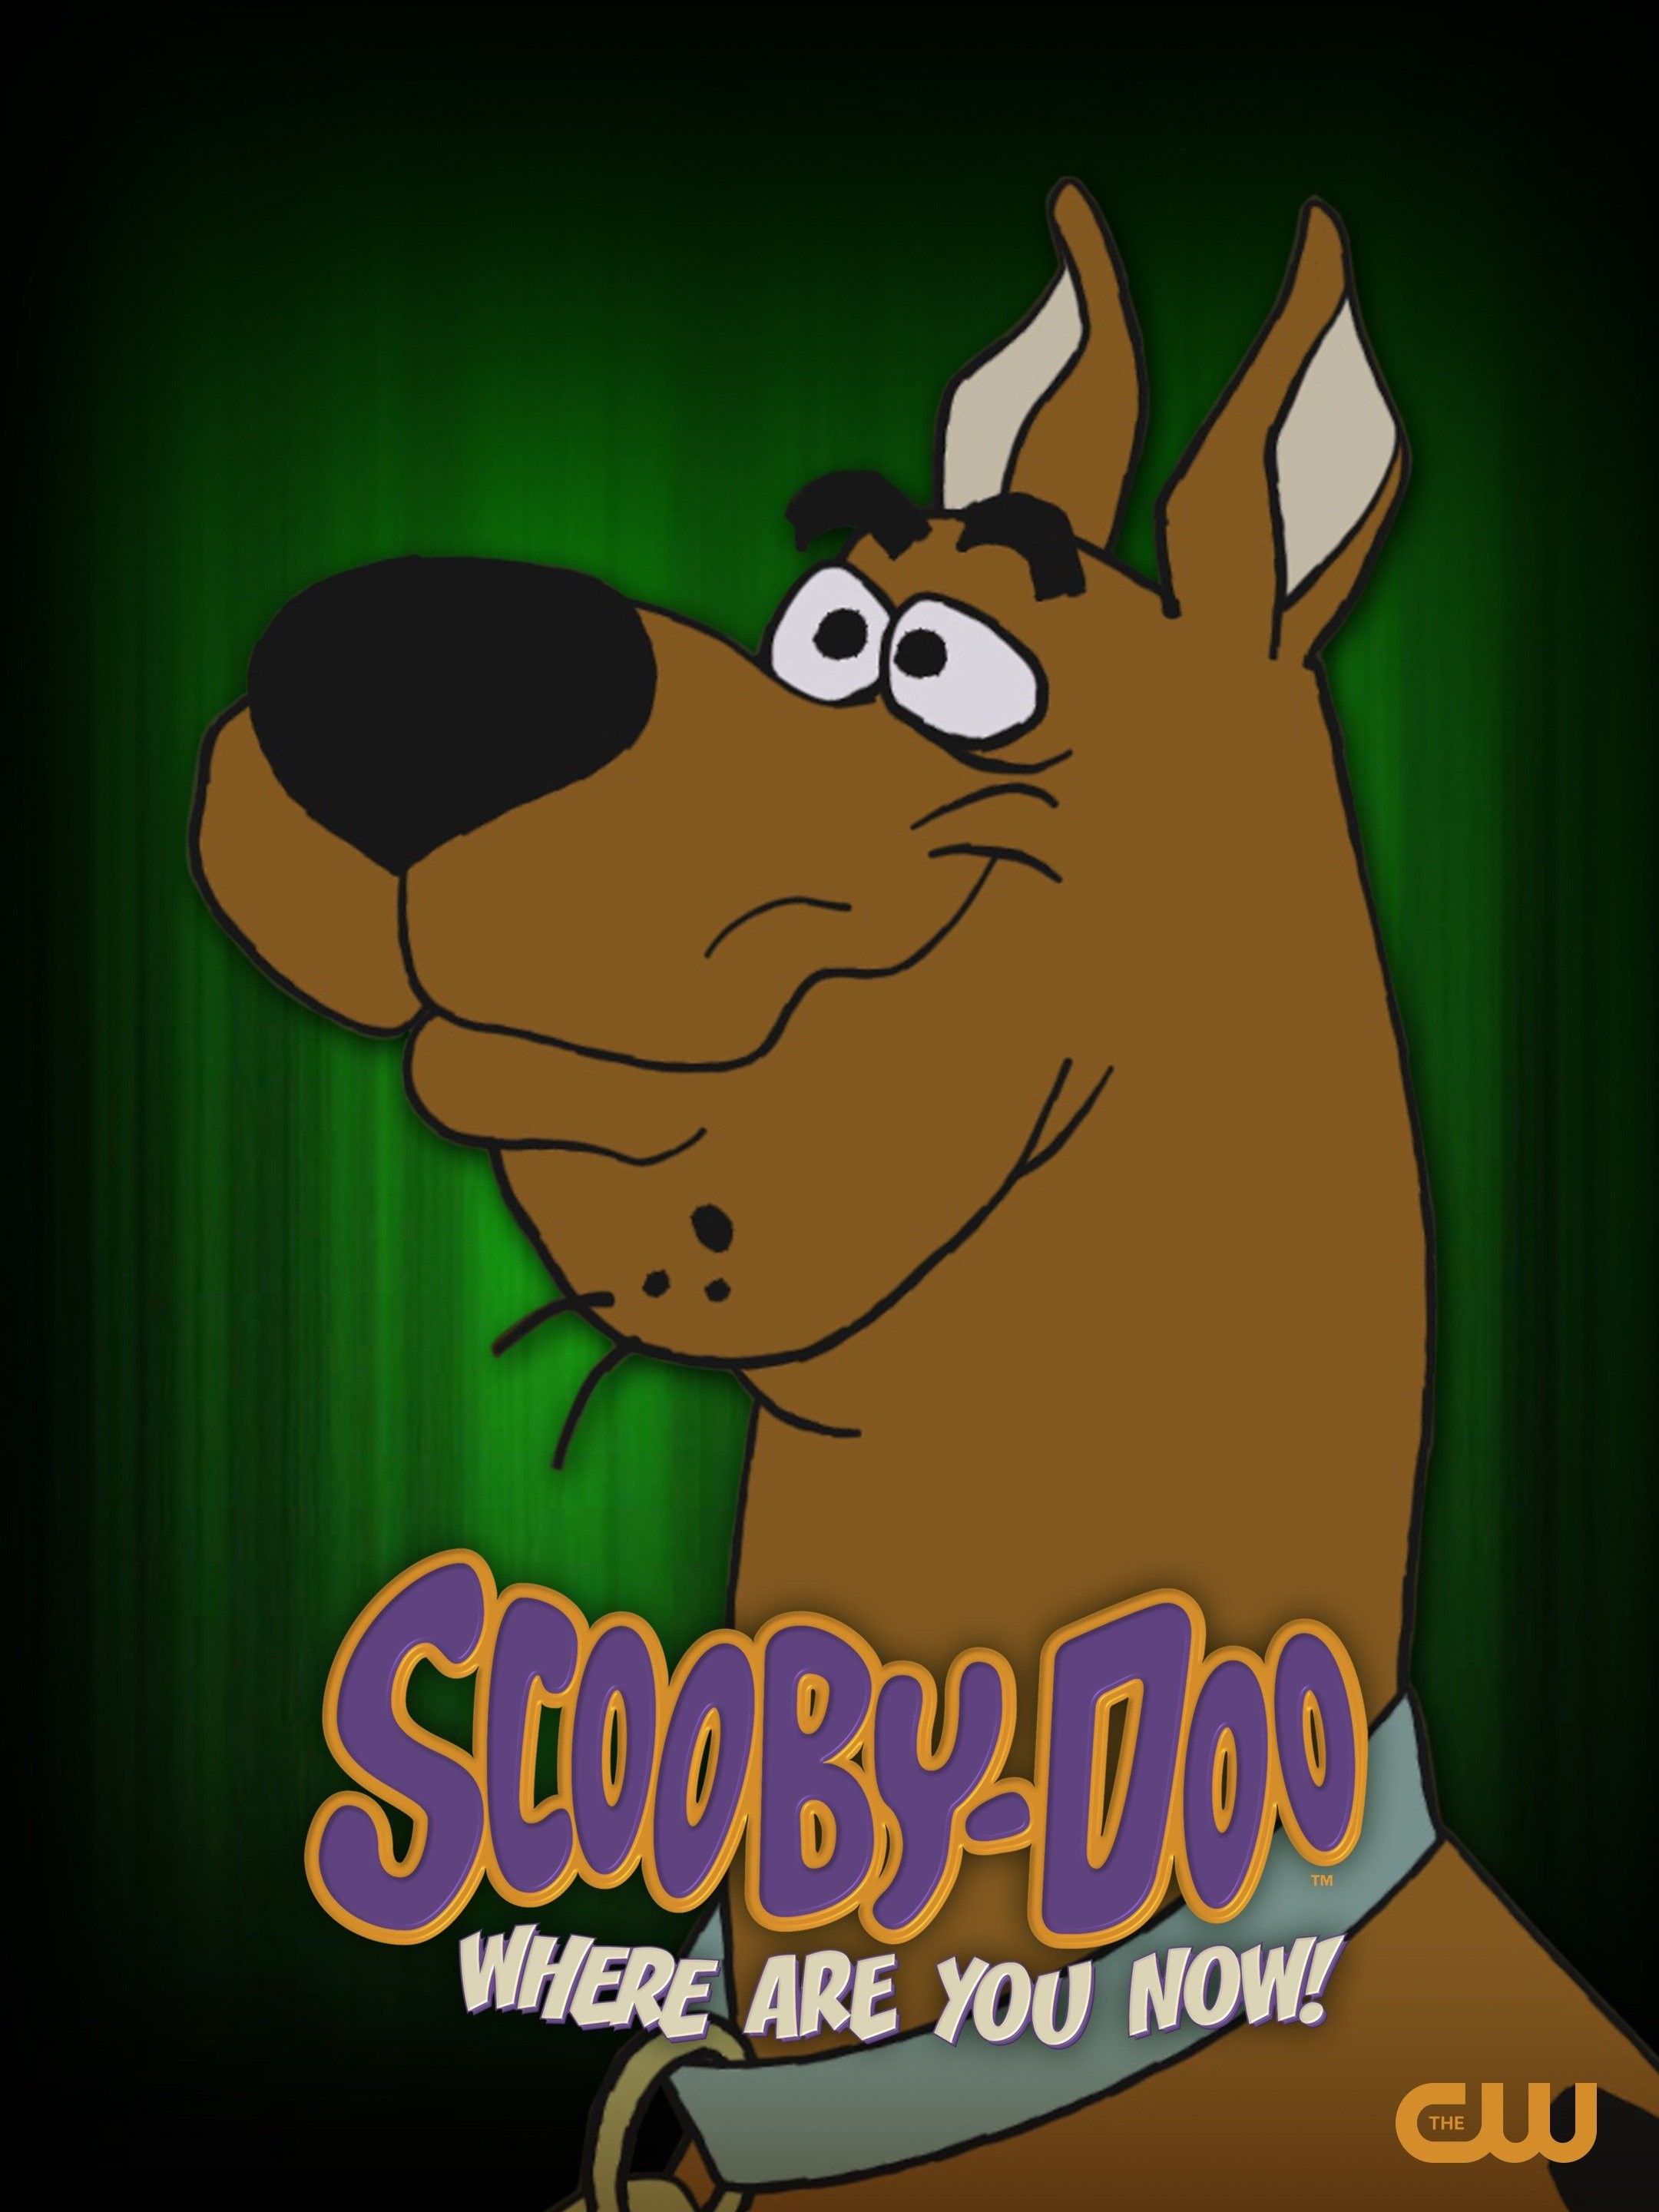 Scooby-Doo, Where Are You Now?